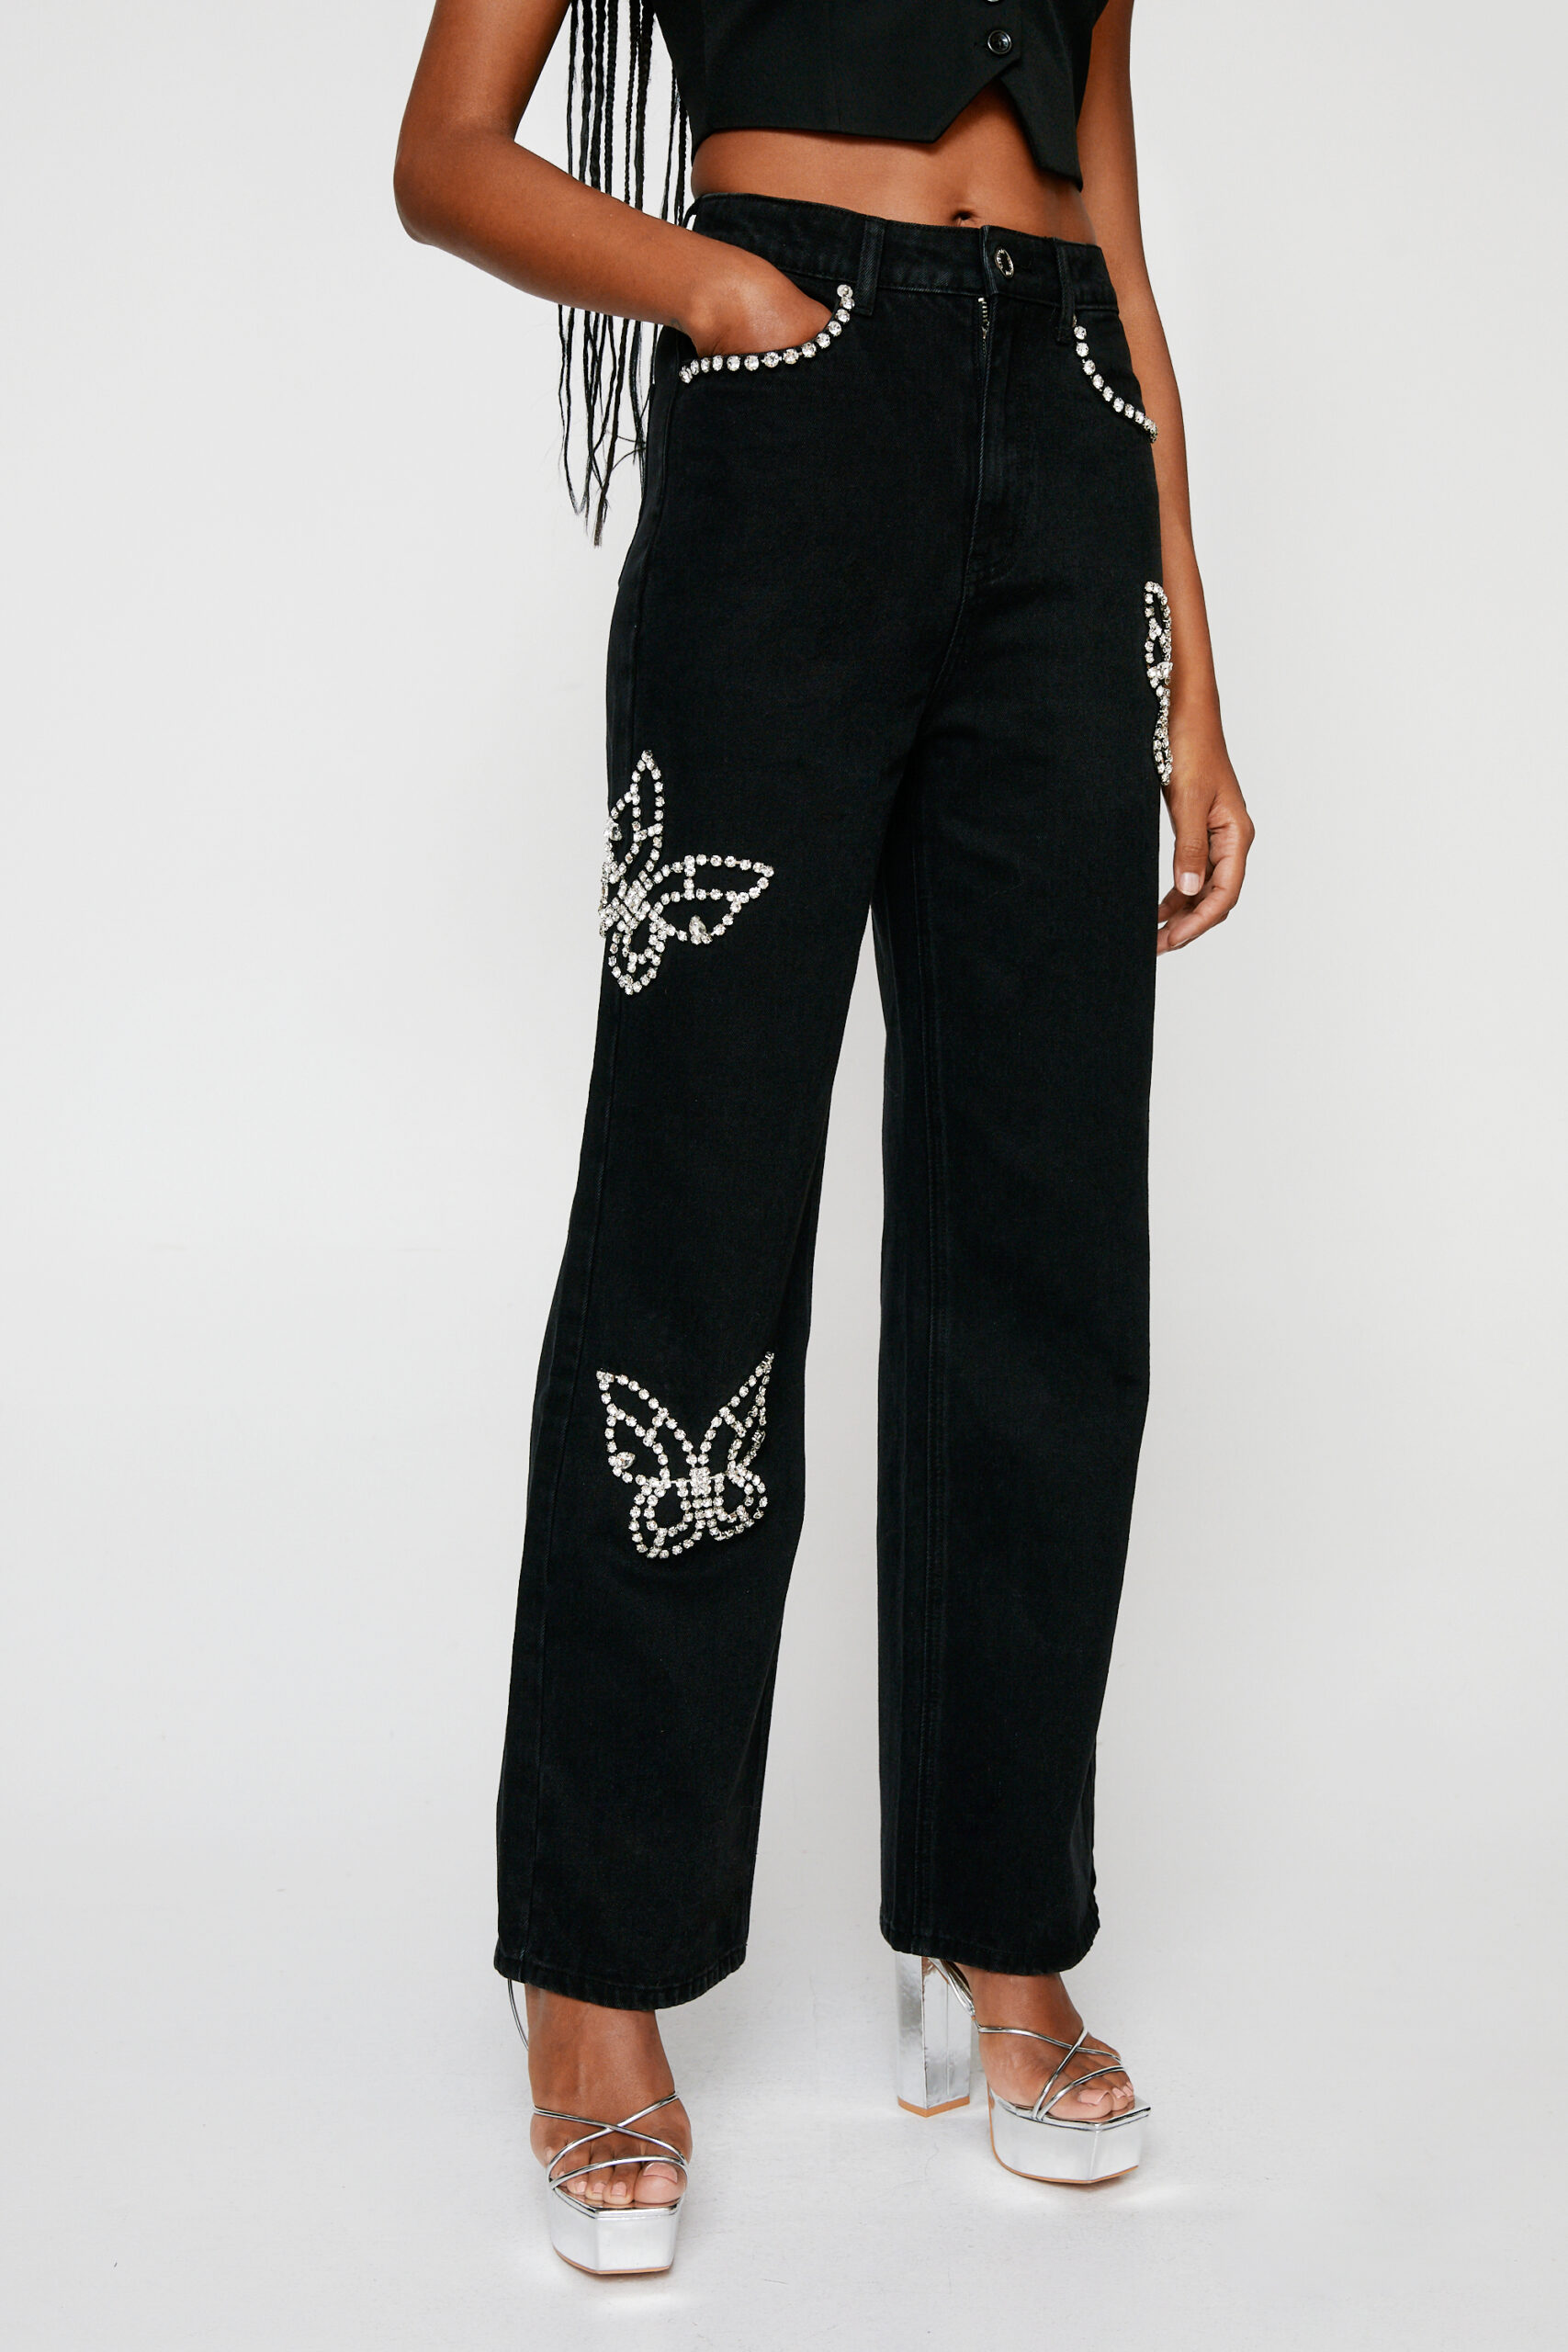 Butterfly Diamante Embellished Straight Leg Jeans